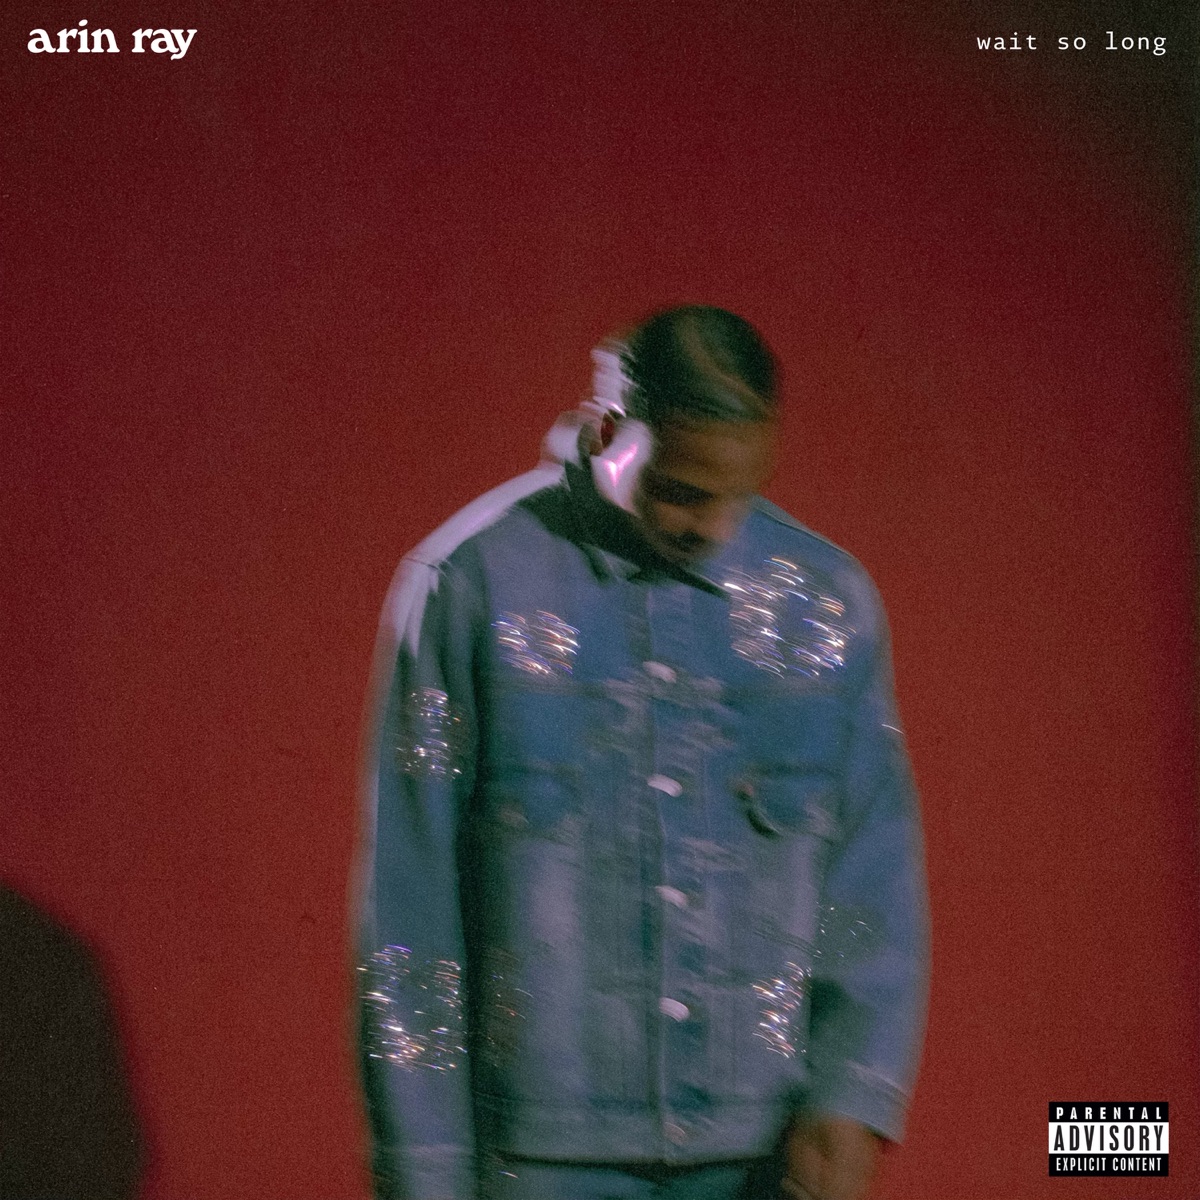 Art for Wait So Long by Arin Ray